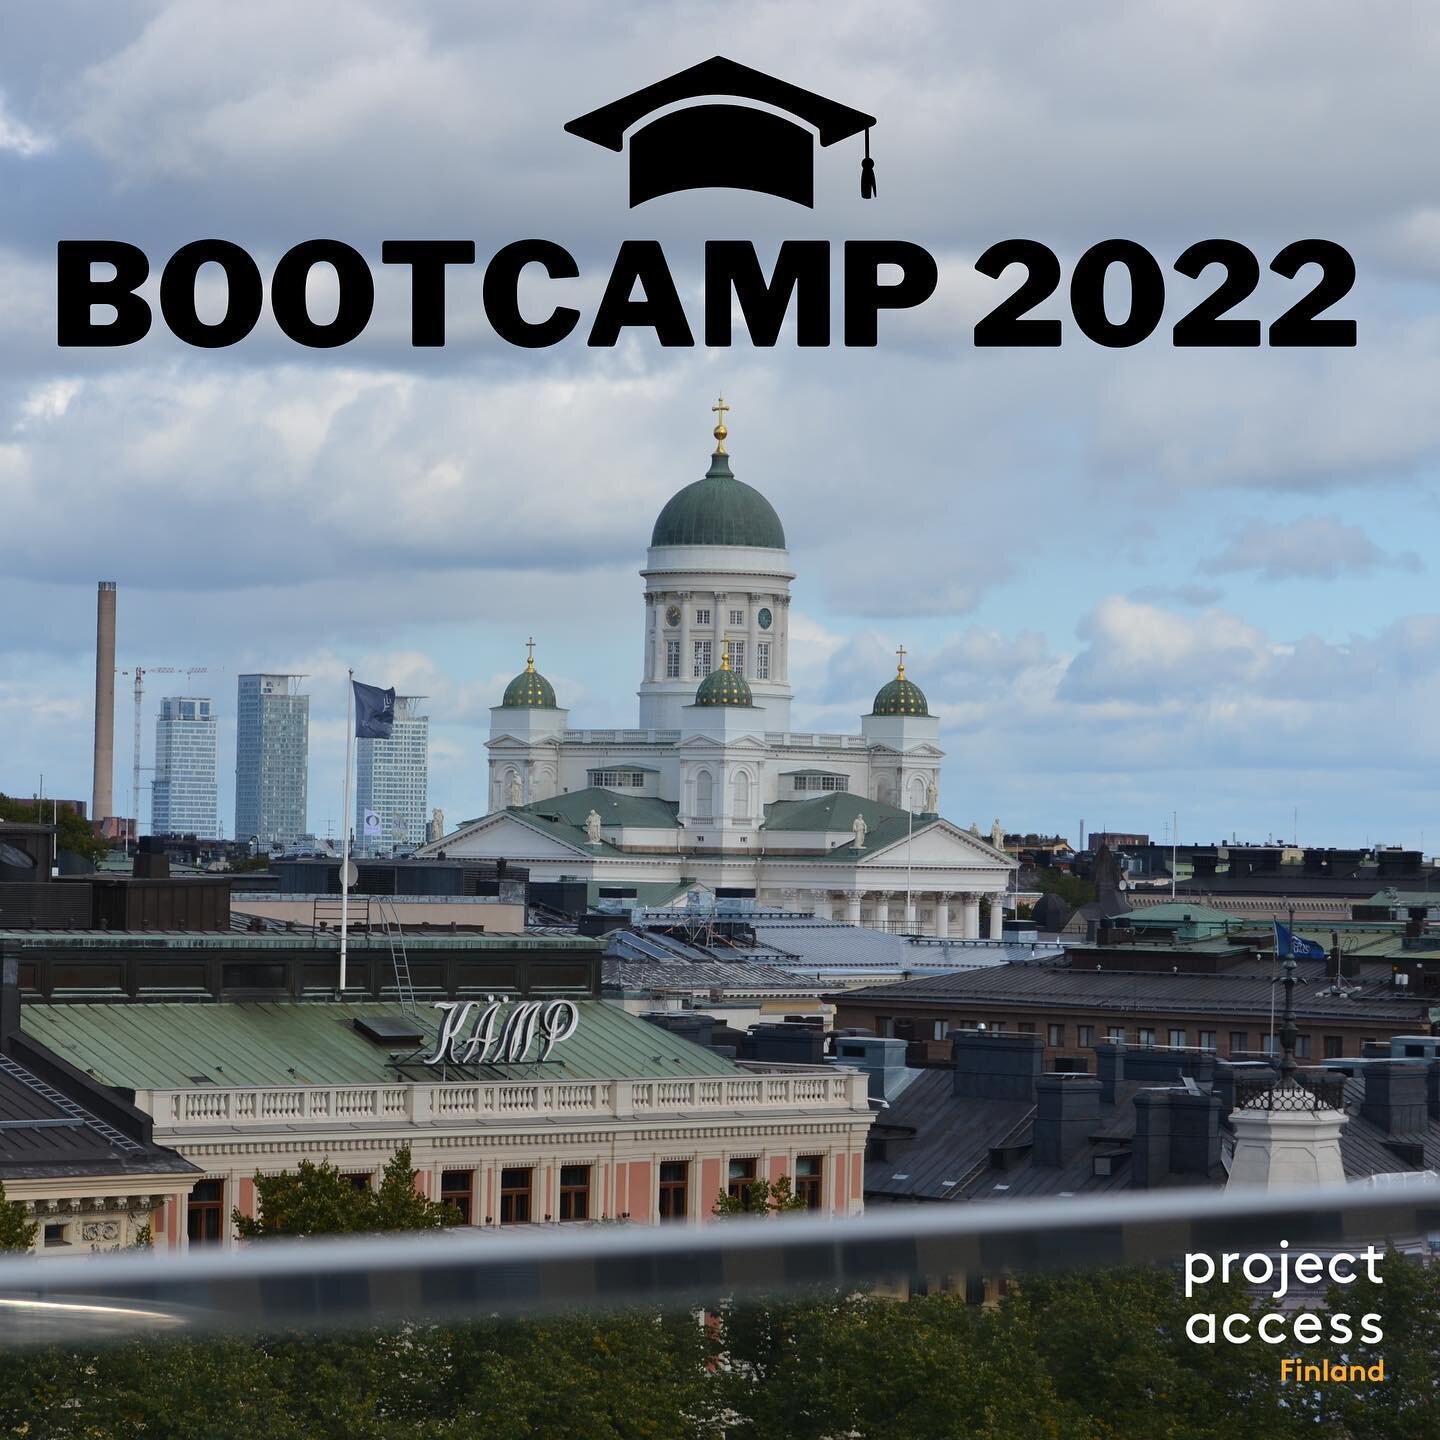 We&rsquo;re back!🎉

This year&rsquo;s university bootcamp will feature subject tasters, career panels, mock interviews, inspirational talks, student panels and of course - getting to know other likeminded students aiming for top universities abroad!